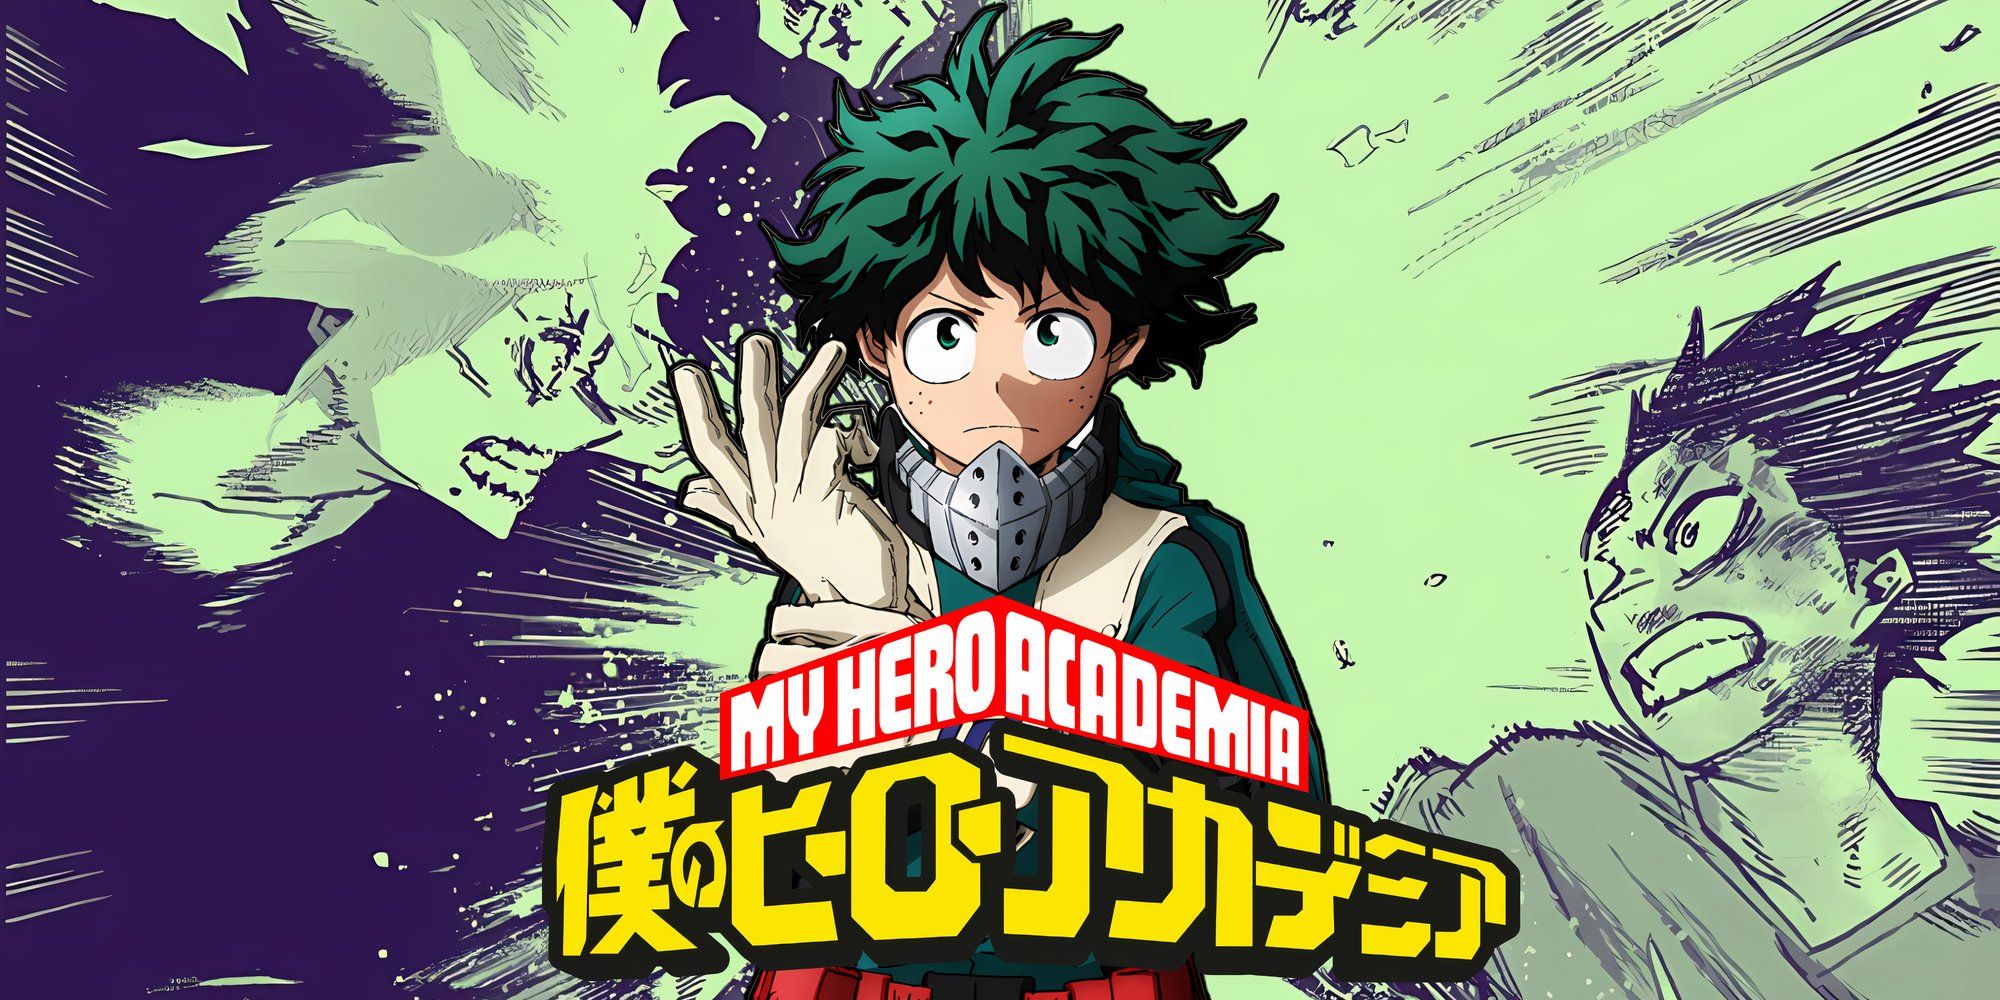 Deku with the title page of Chapter 42 of the MHA manga in the background